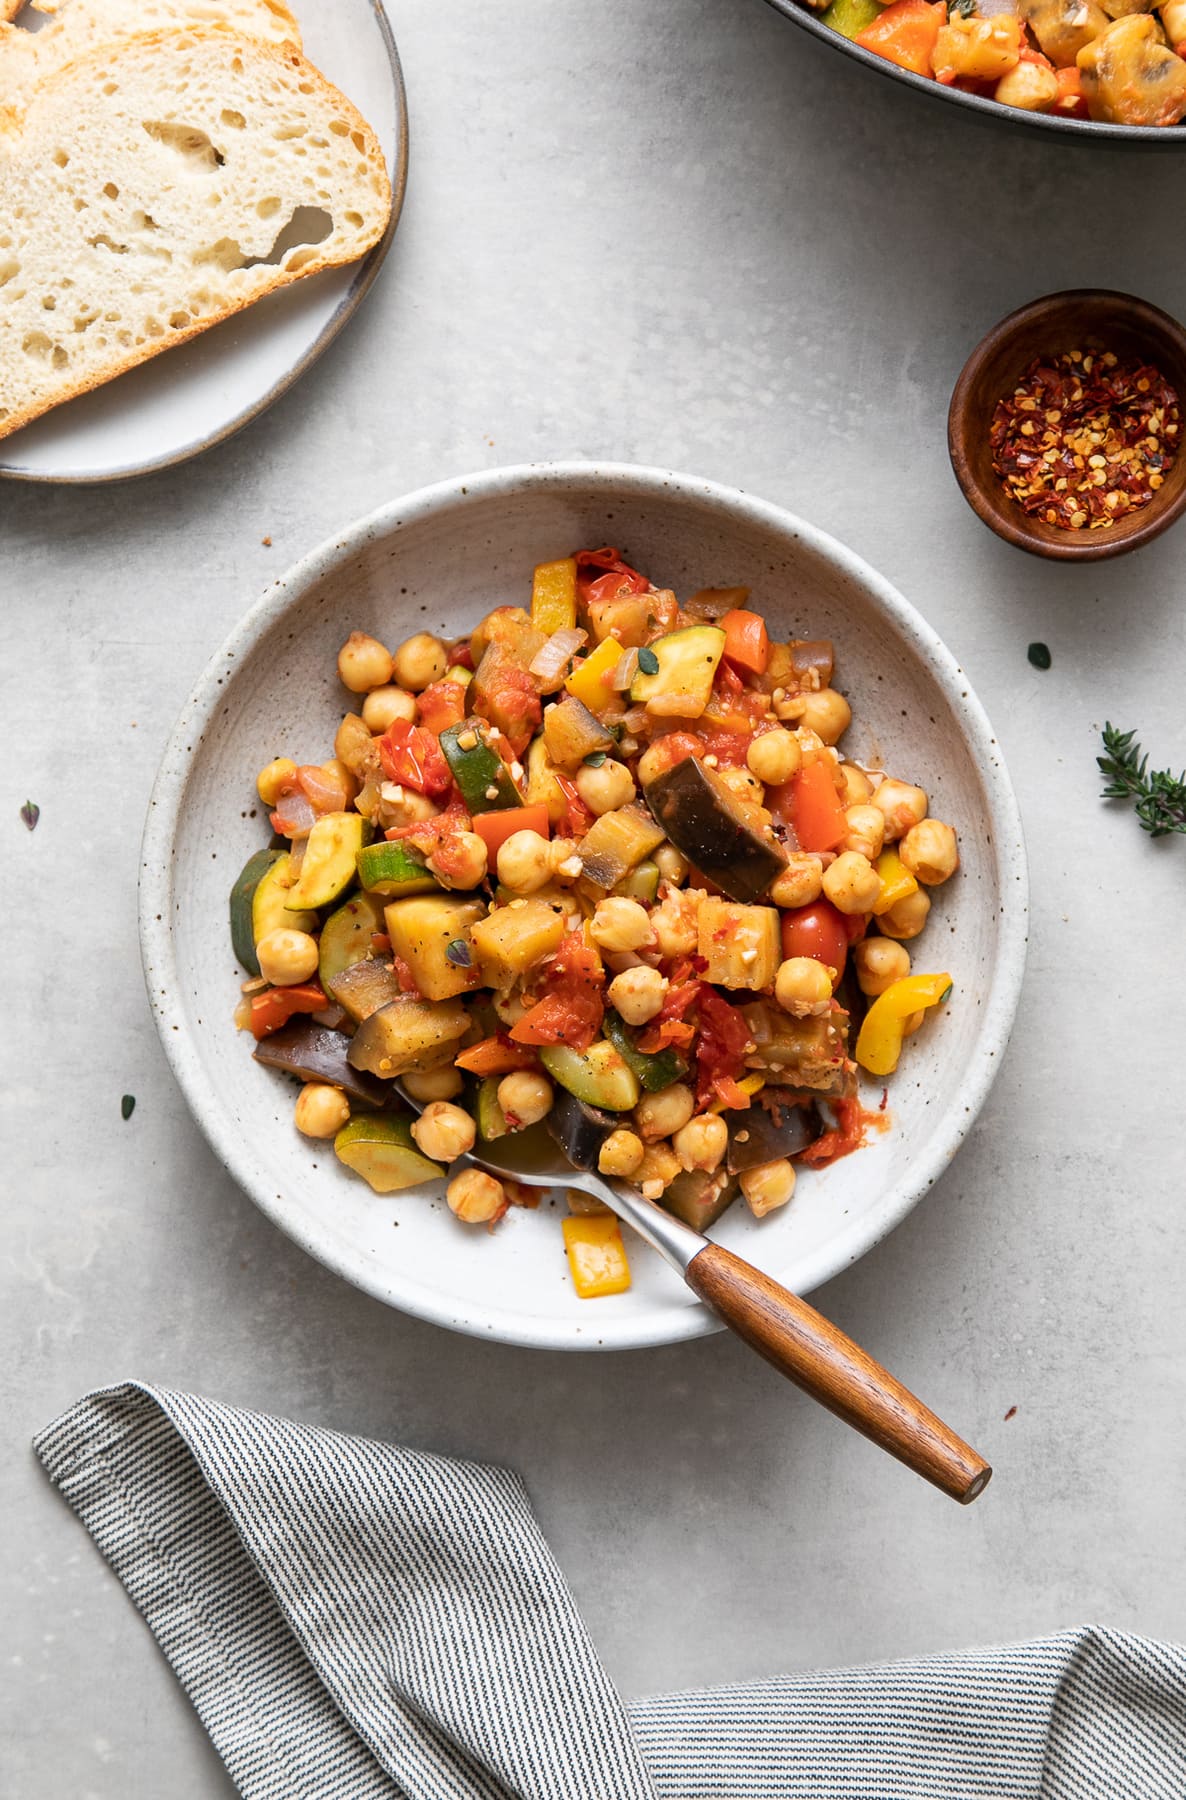 top down view of a bowl with serving of chickpea ratatouille with wooden fork and items surrounding.